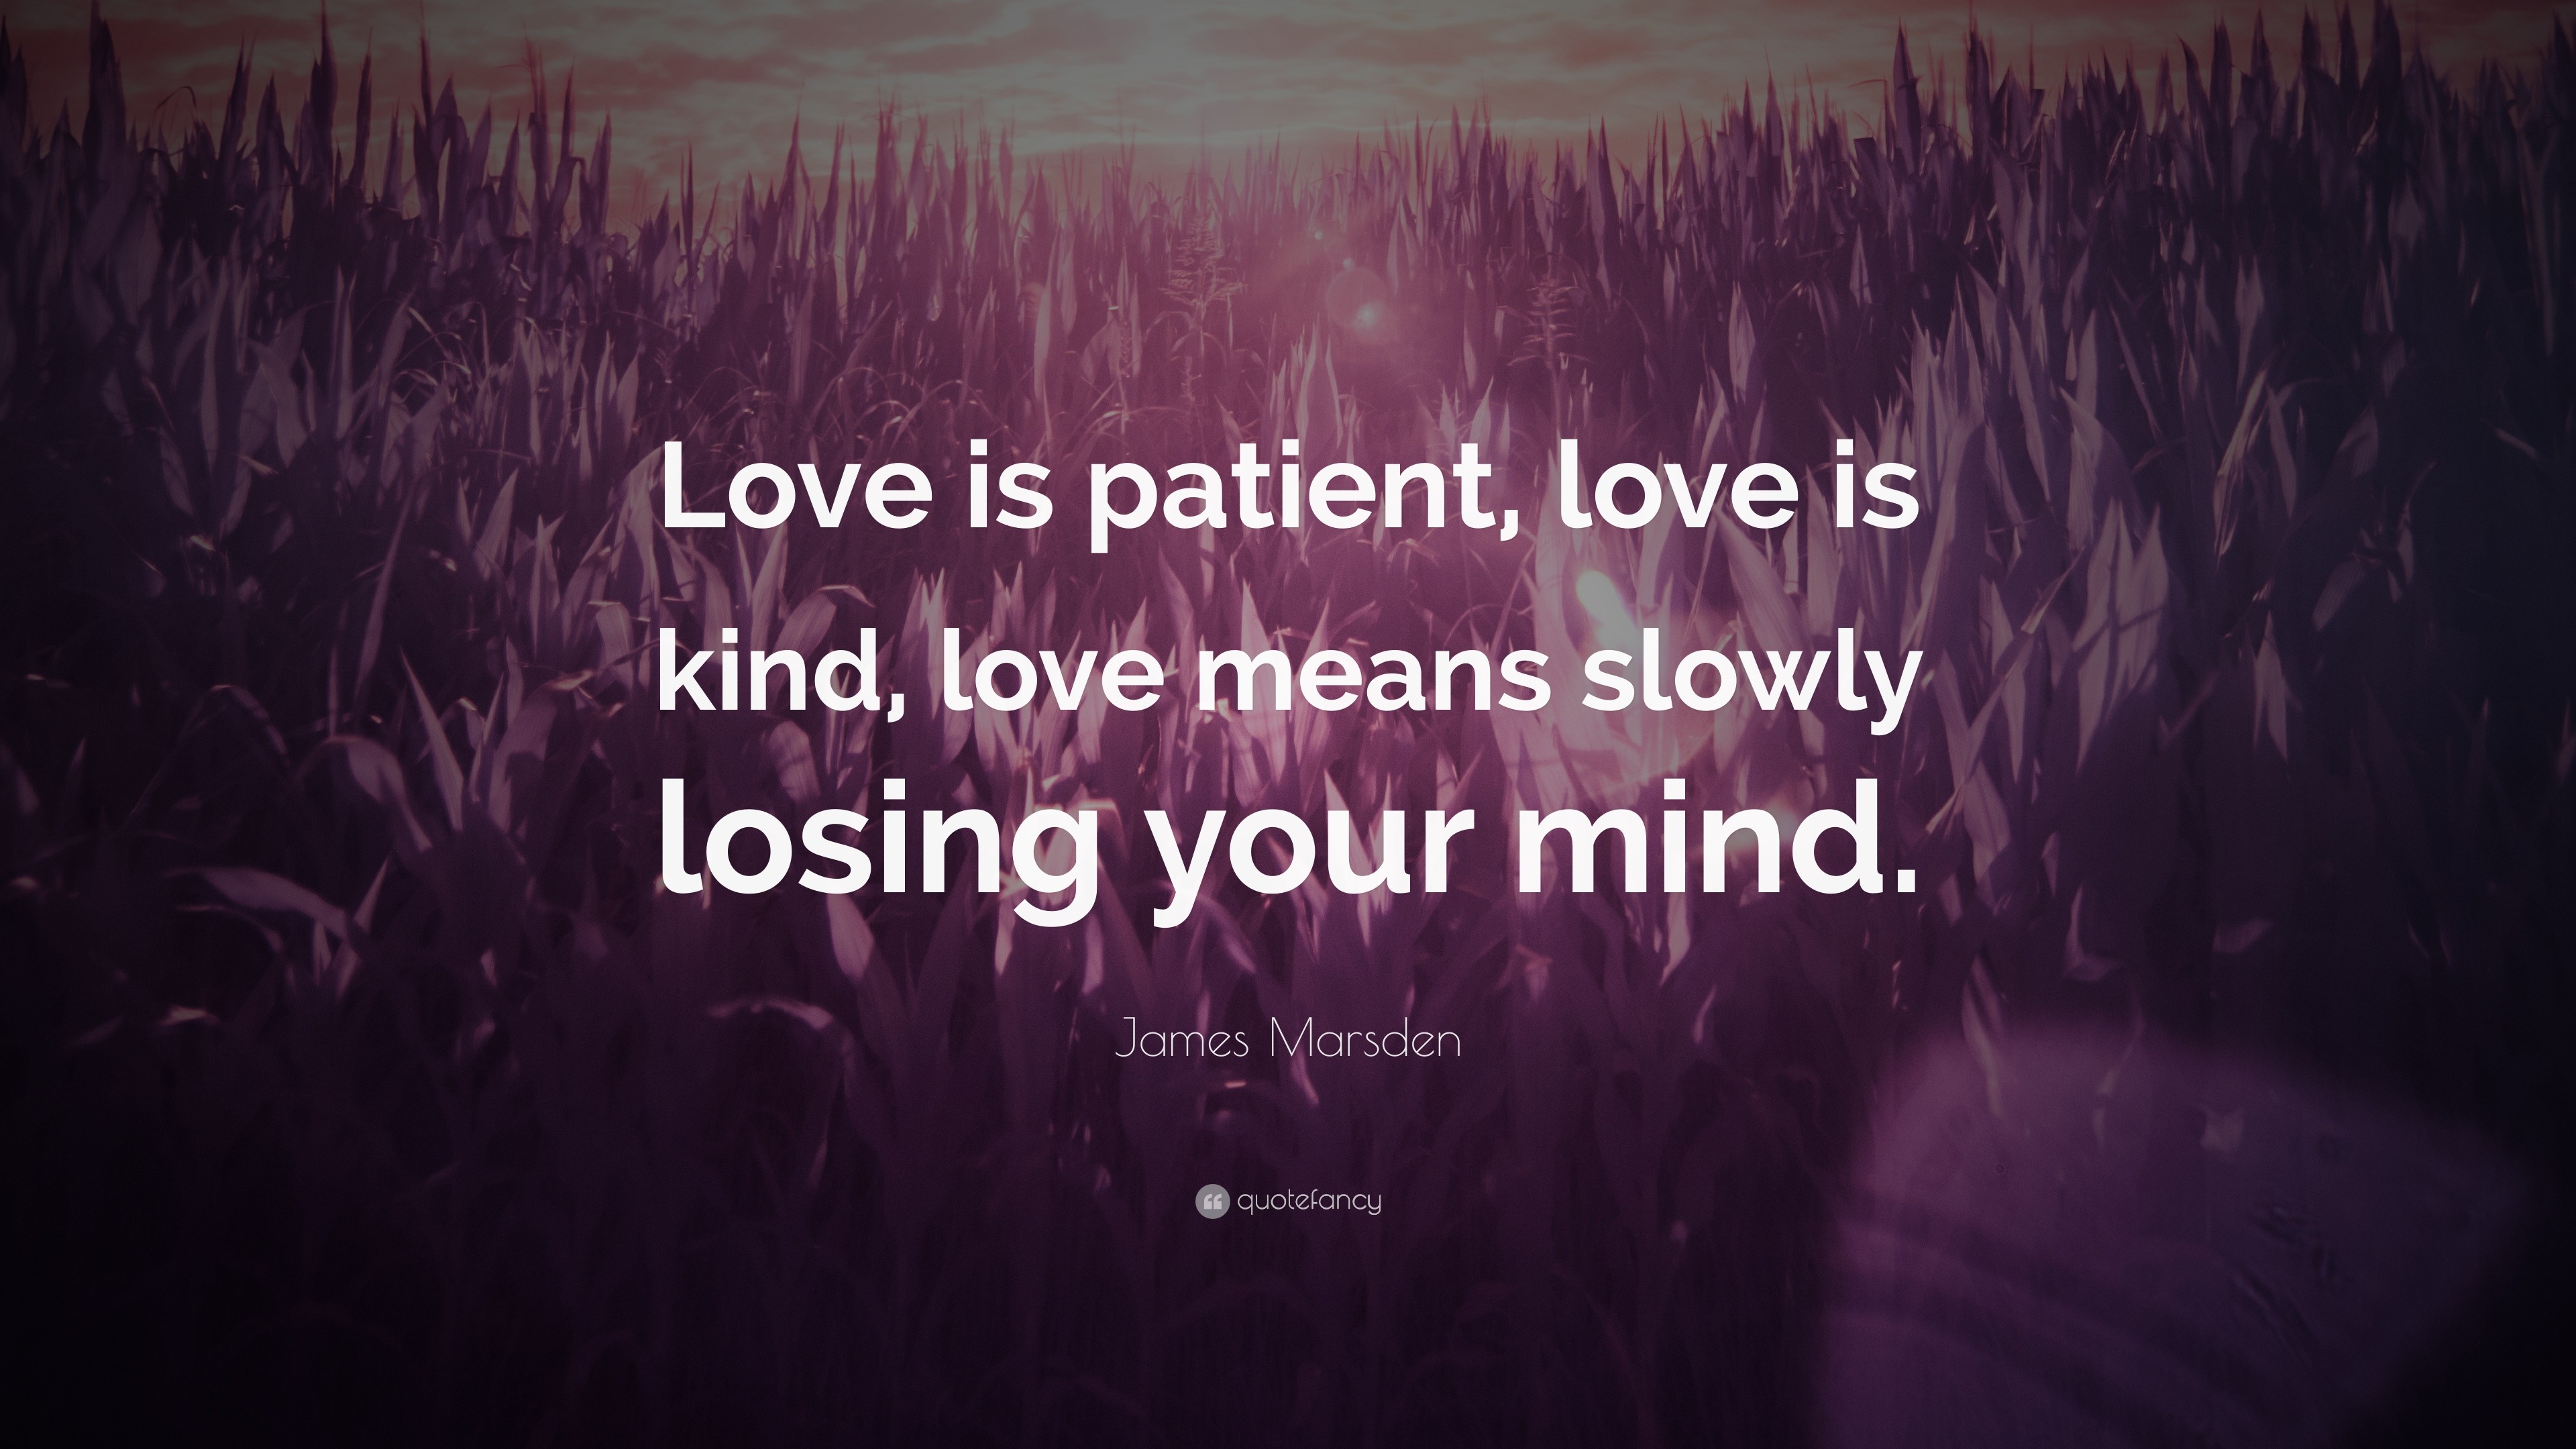 James Marsden Quote: “Love is patient, love is kind, love means slowly